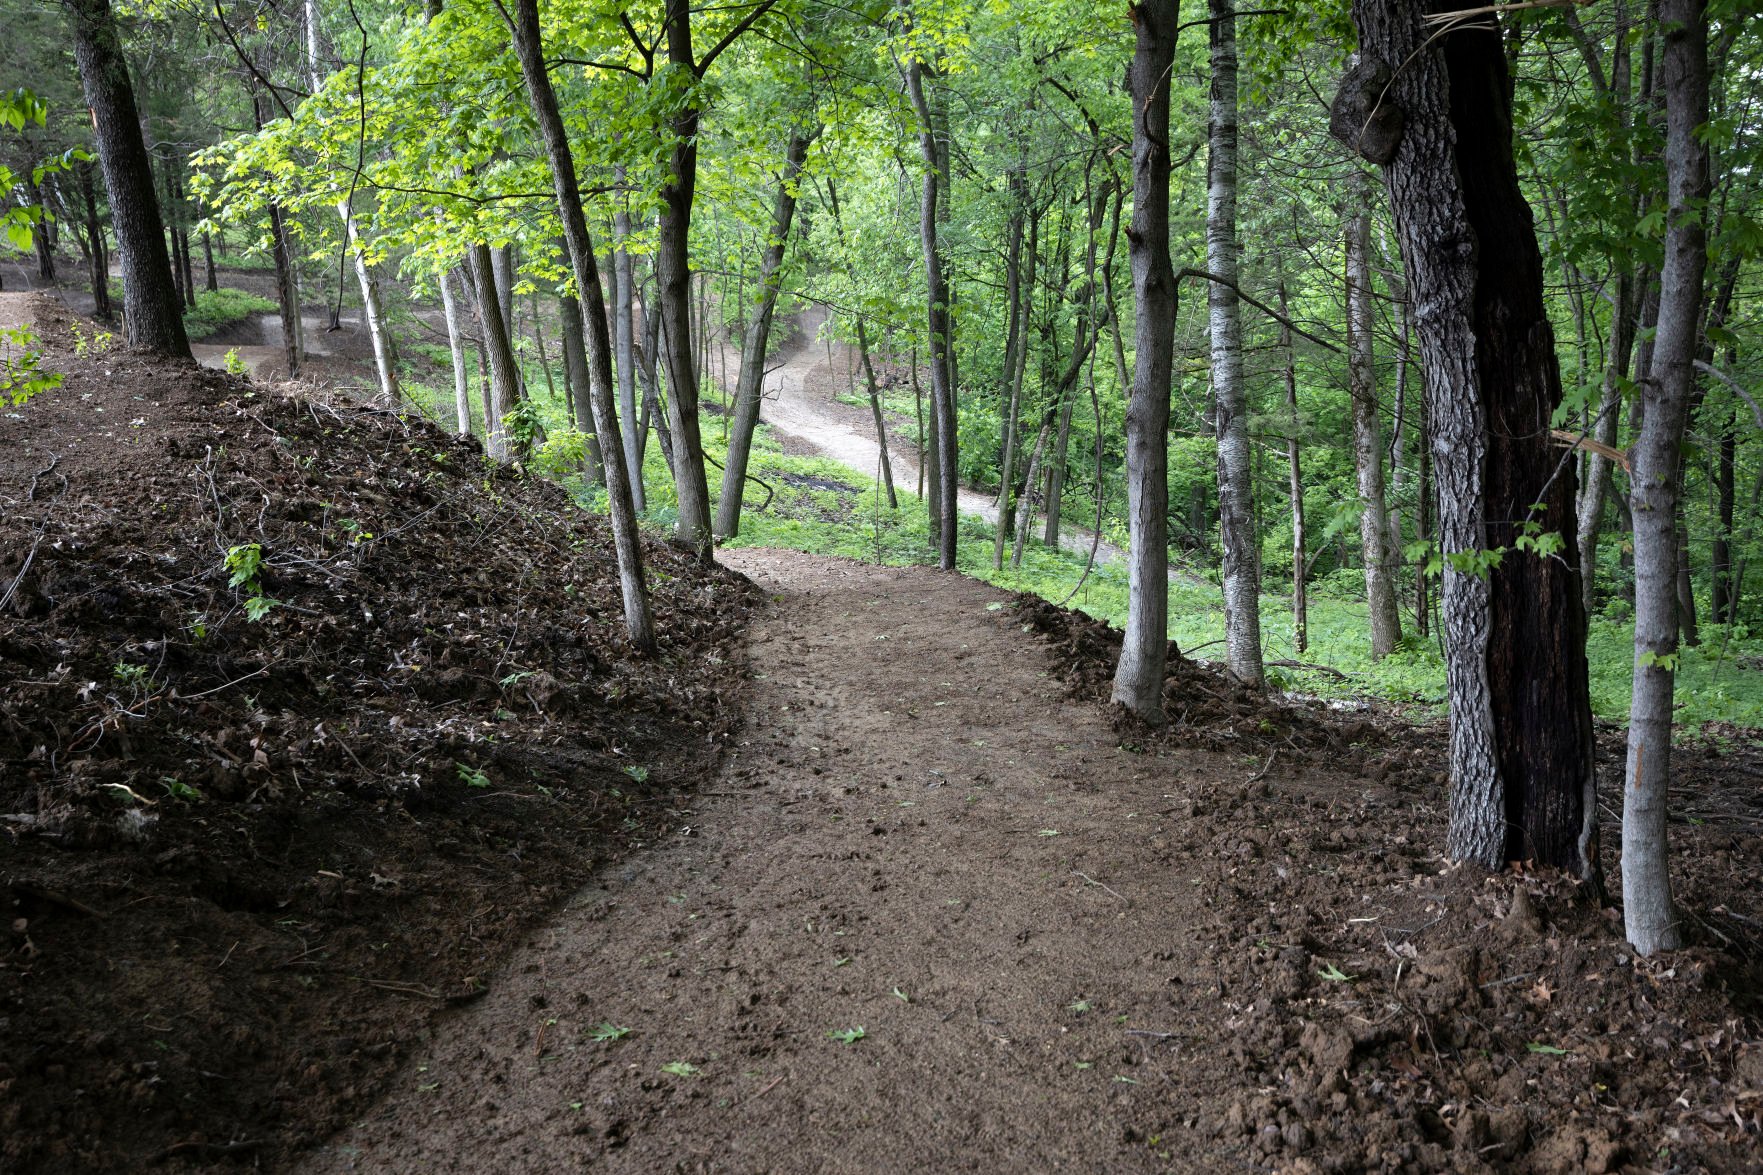 New mountain bike trails have been constructed at Chestnut Mountain Resort in Galena, Ill.    PHOTO CREDIT: Stephen Gassman